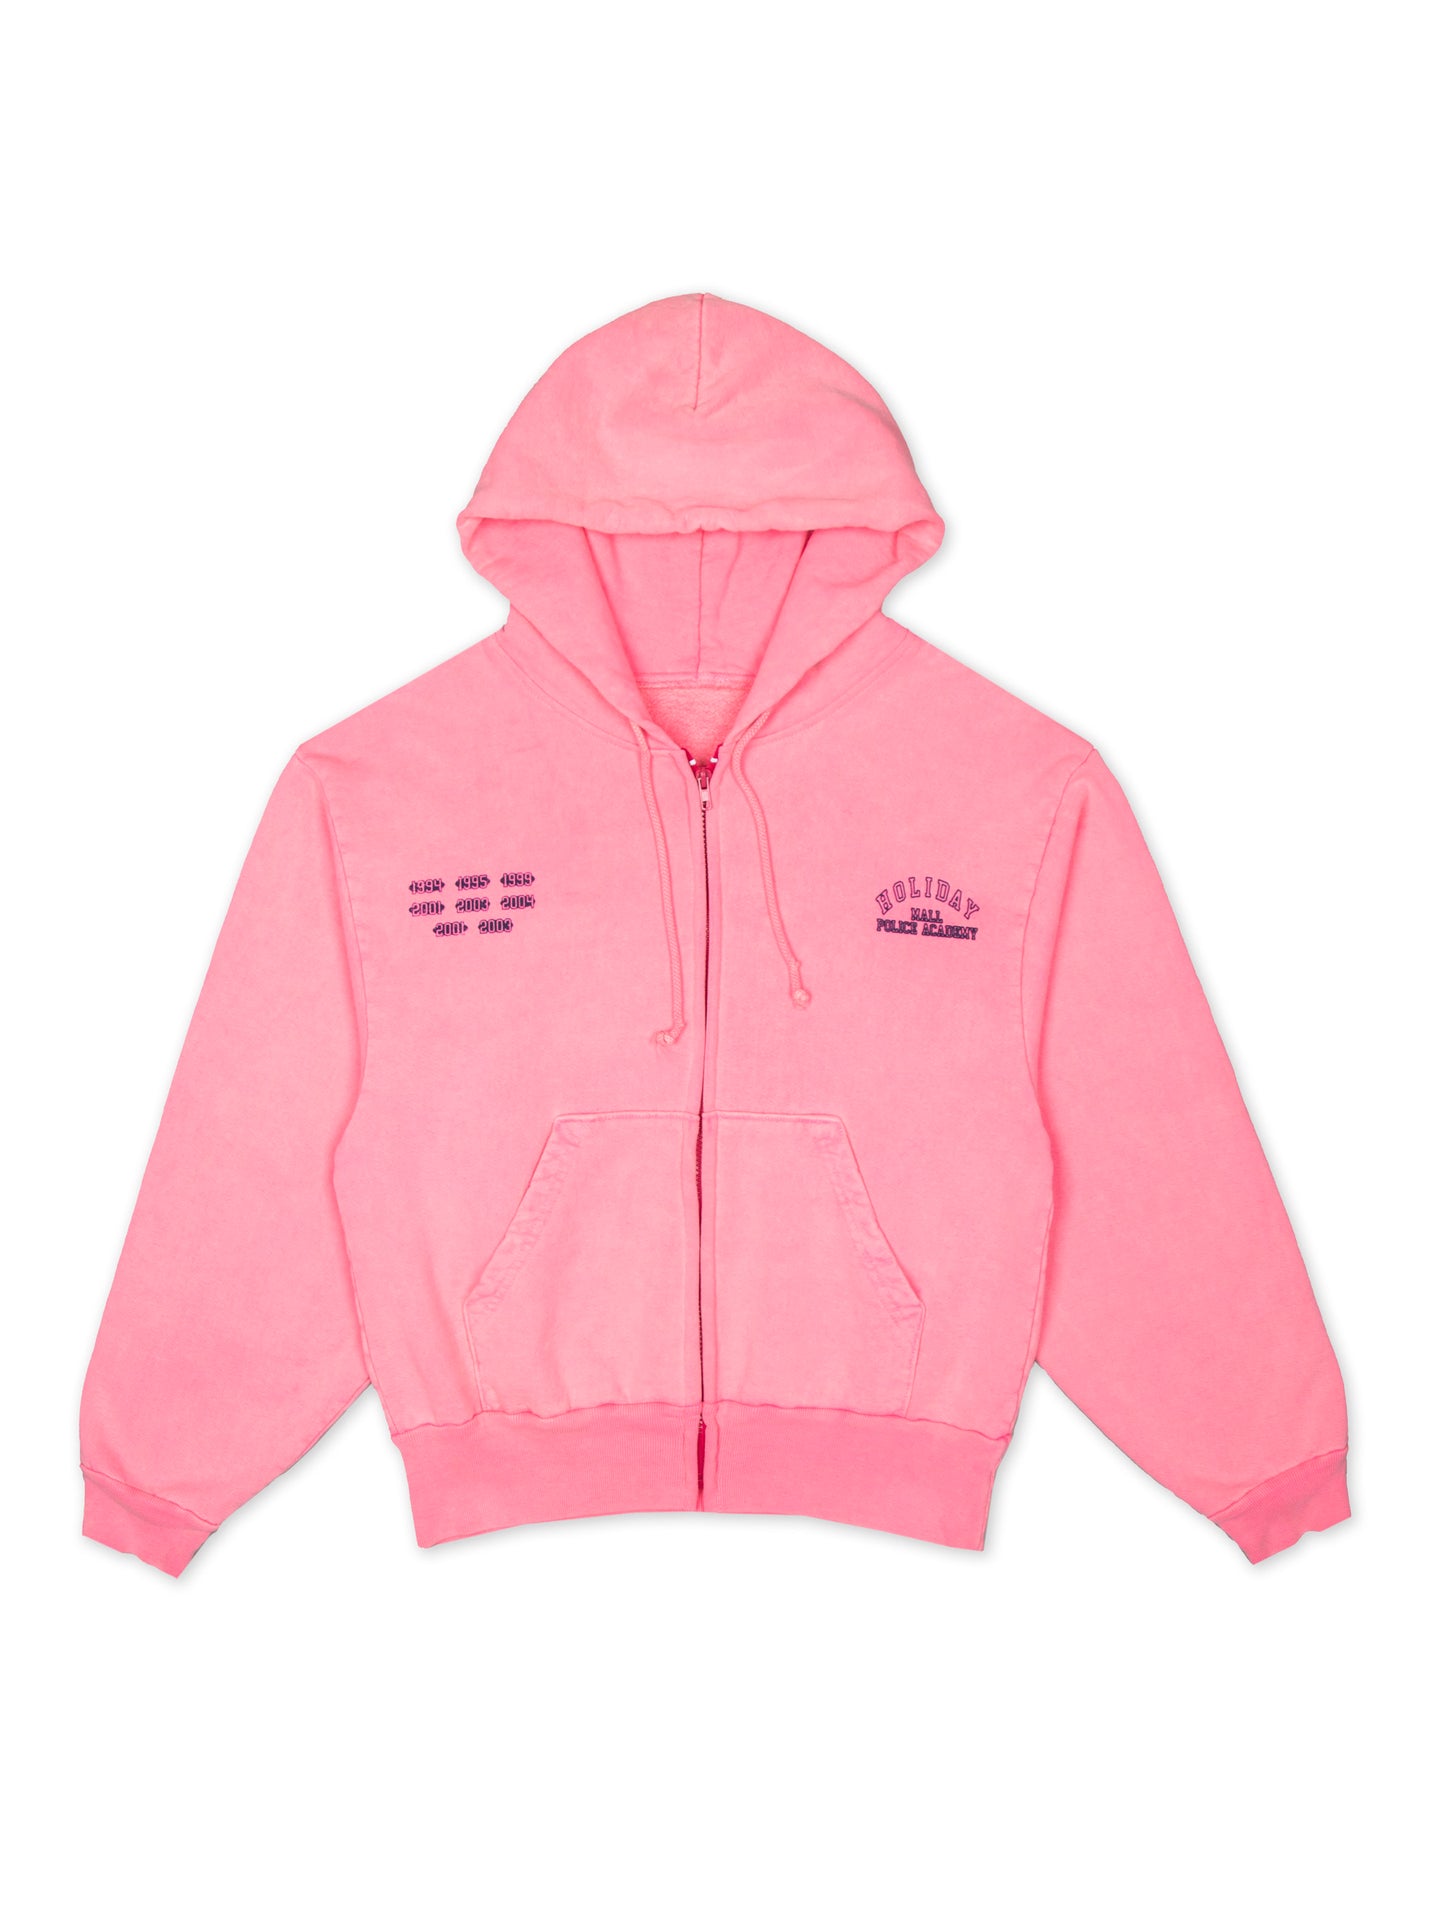 MALL ACADEMY HOODIE (PINK)